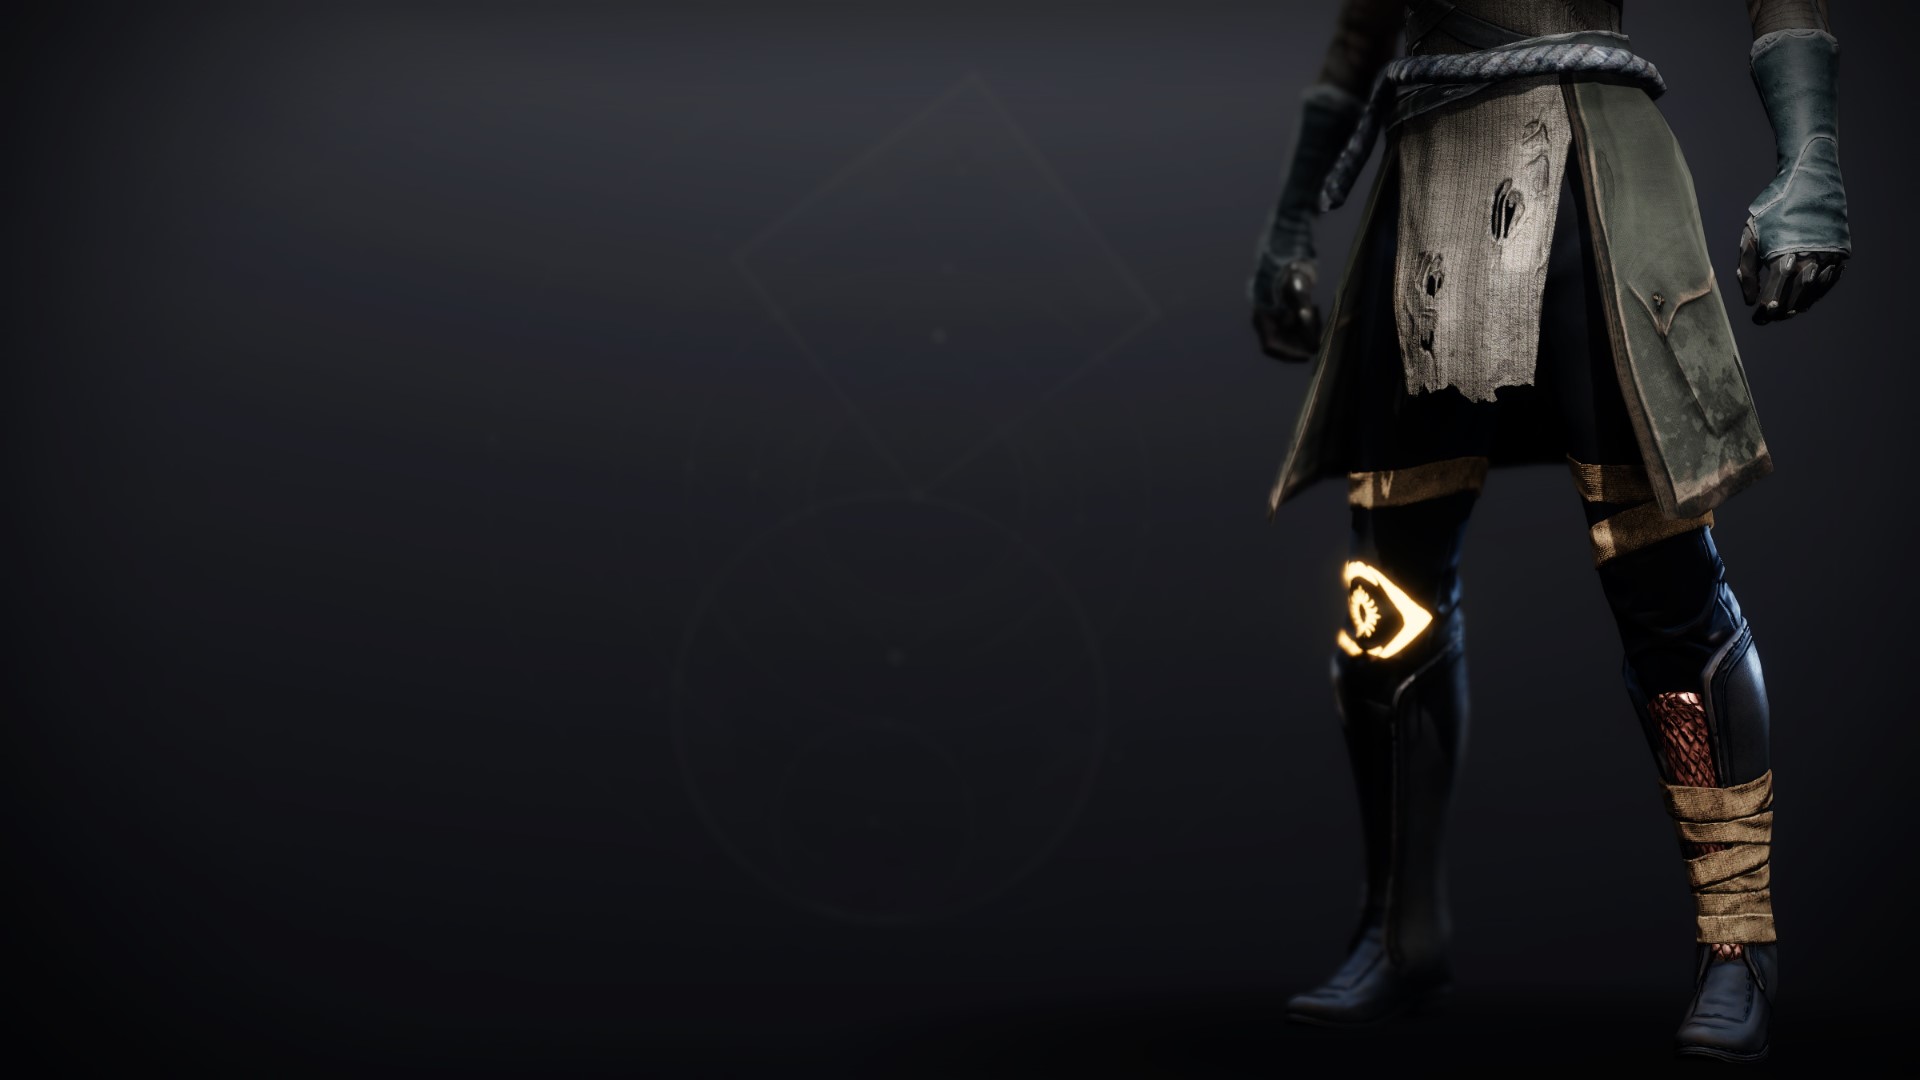 An in-game render of the Pyrrhic Ascent Boots.